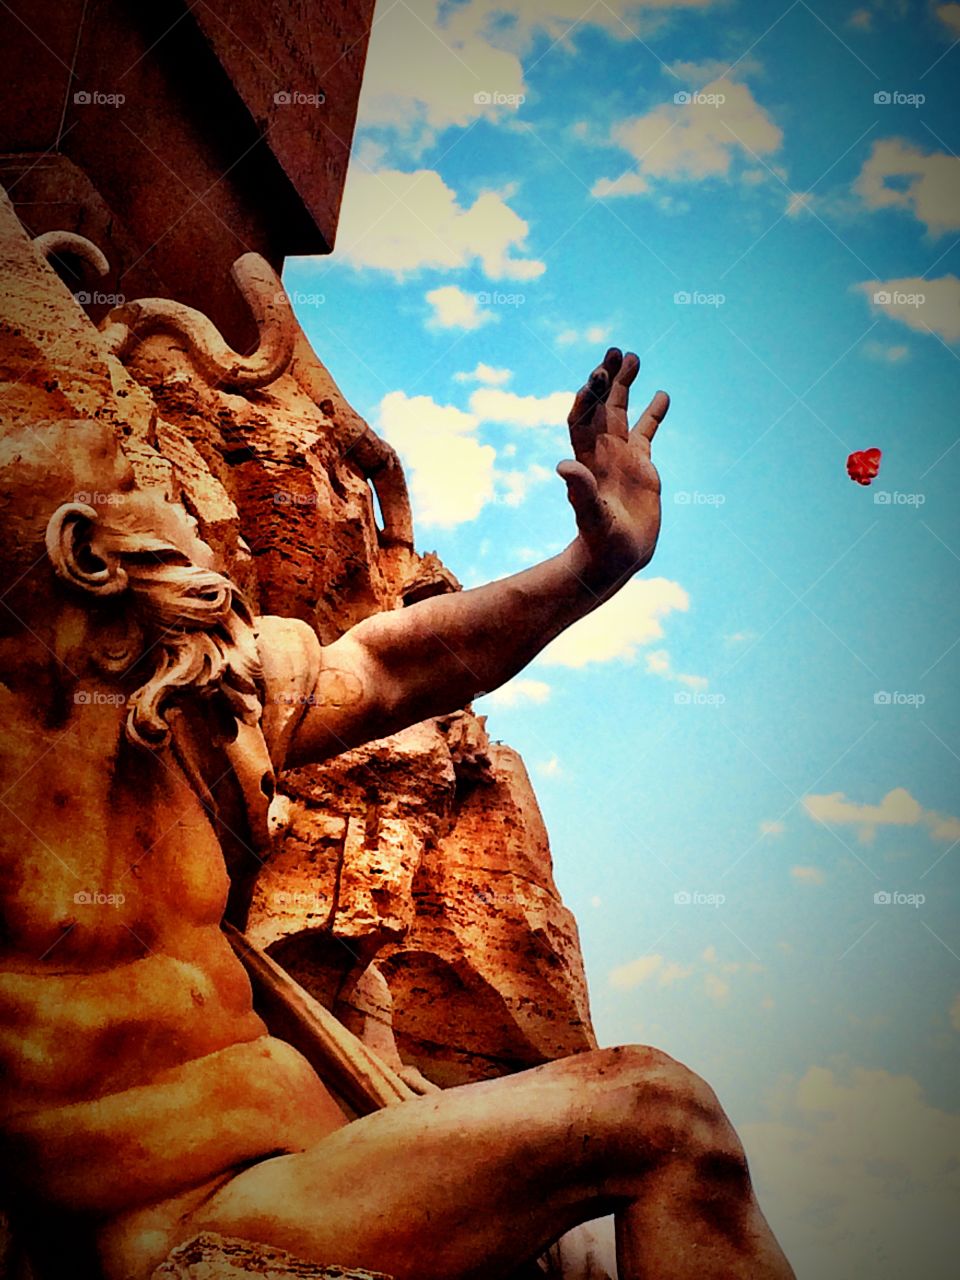 Fountain in Piazza Navona Rome, Italy reaching for balloon heart 